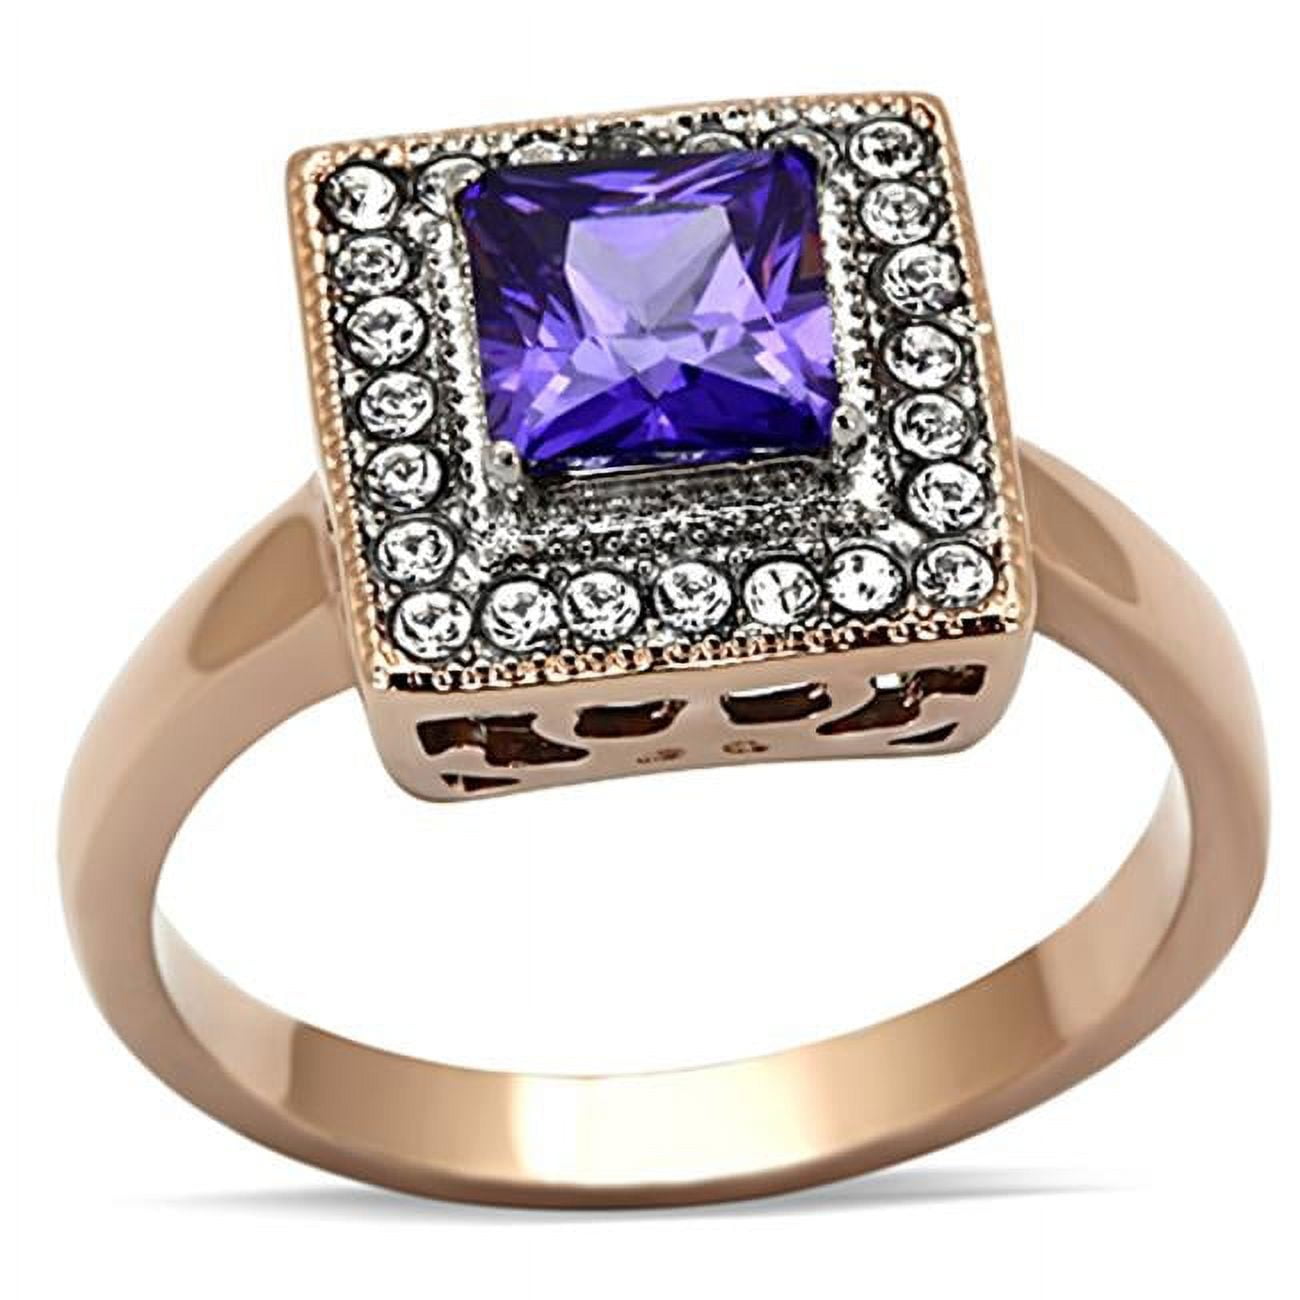 Women Two-Tone IP Rose Gold Stainless Steel Ring with AAA Grade CZ in Tanzanite - Size 10 -  Precious Stone, PR1494520